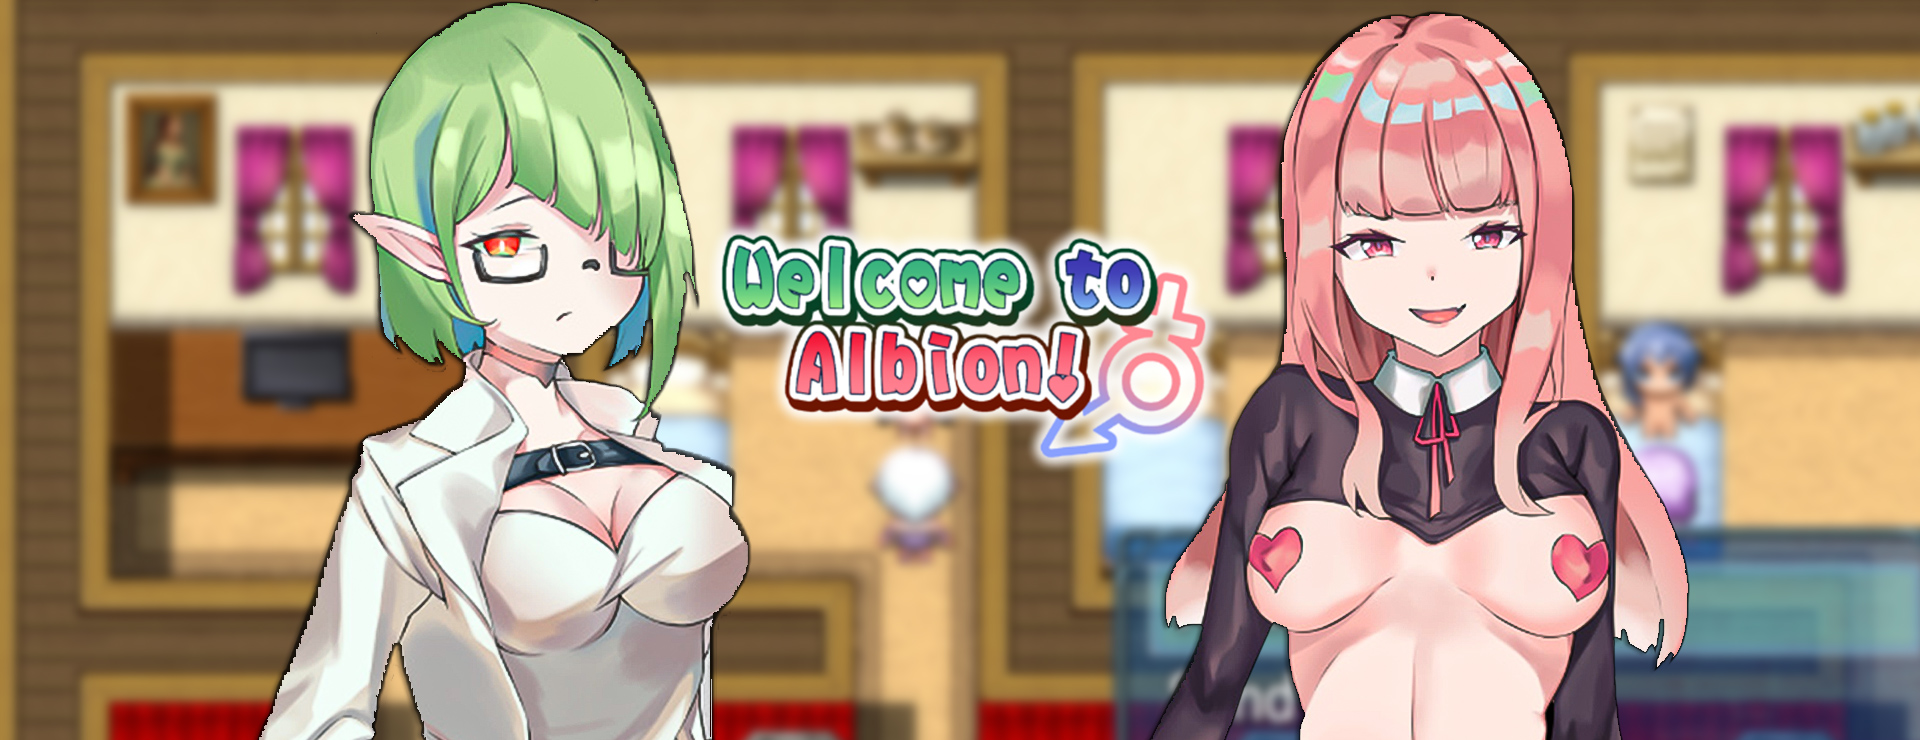 Welcome to Albion! - RPG ゲーム